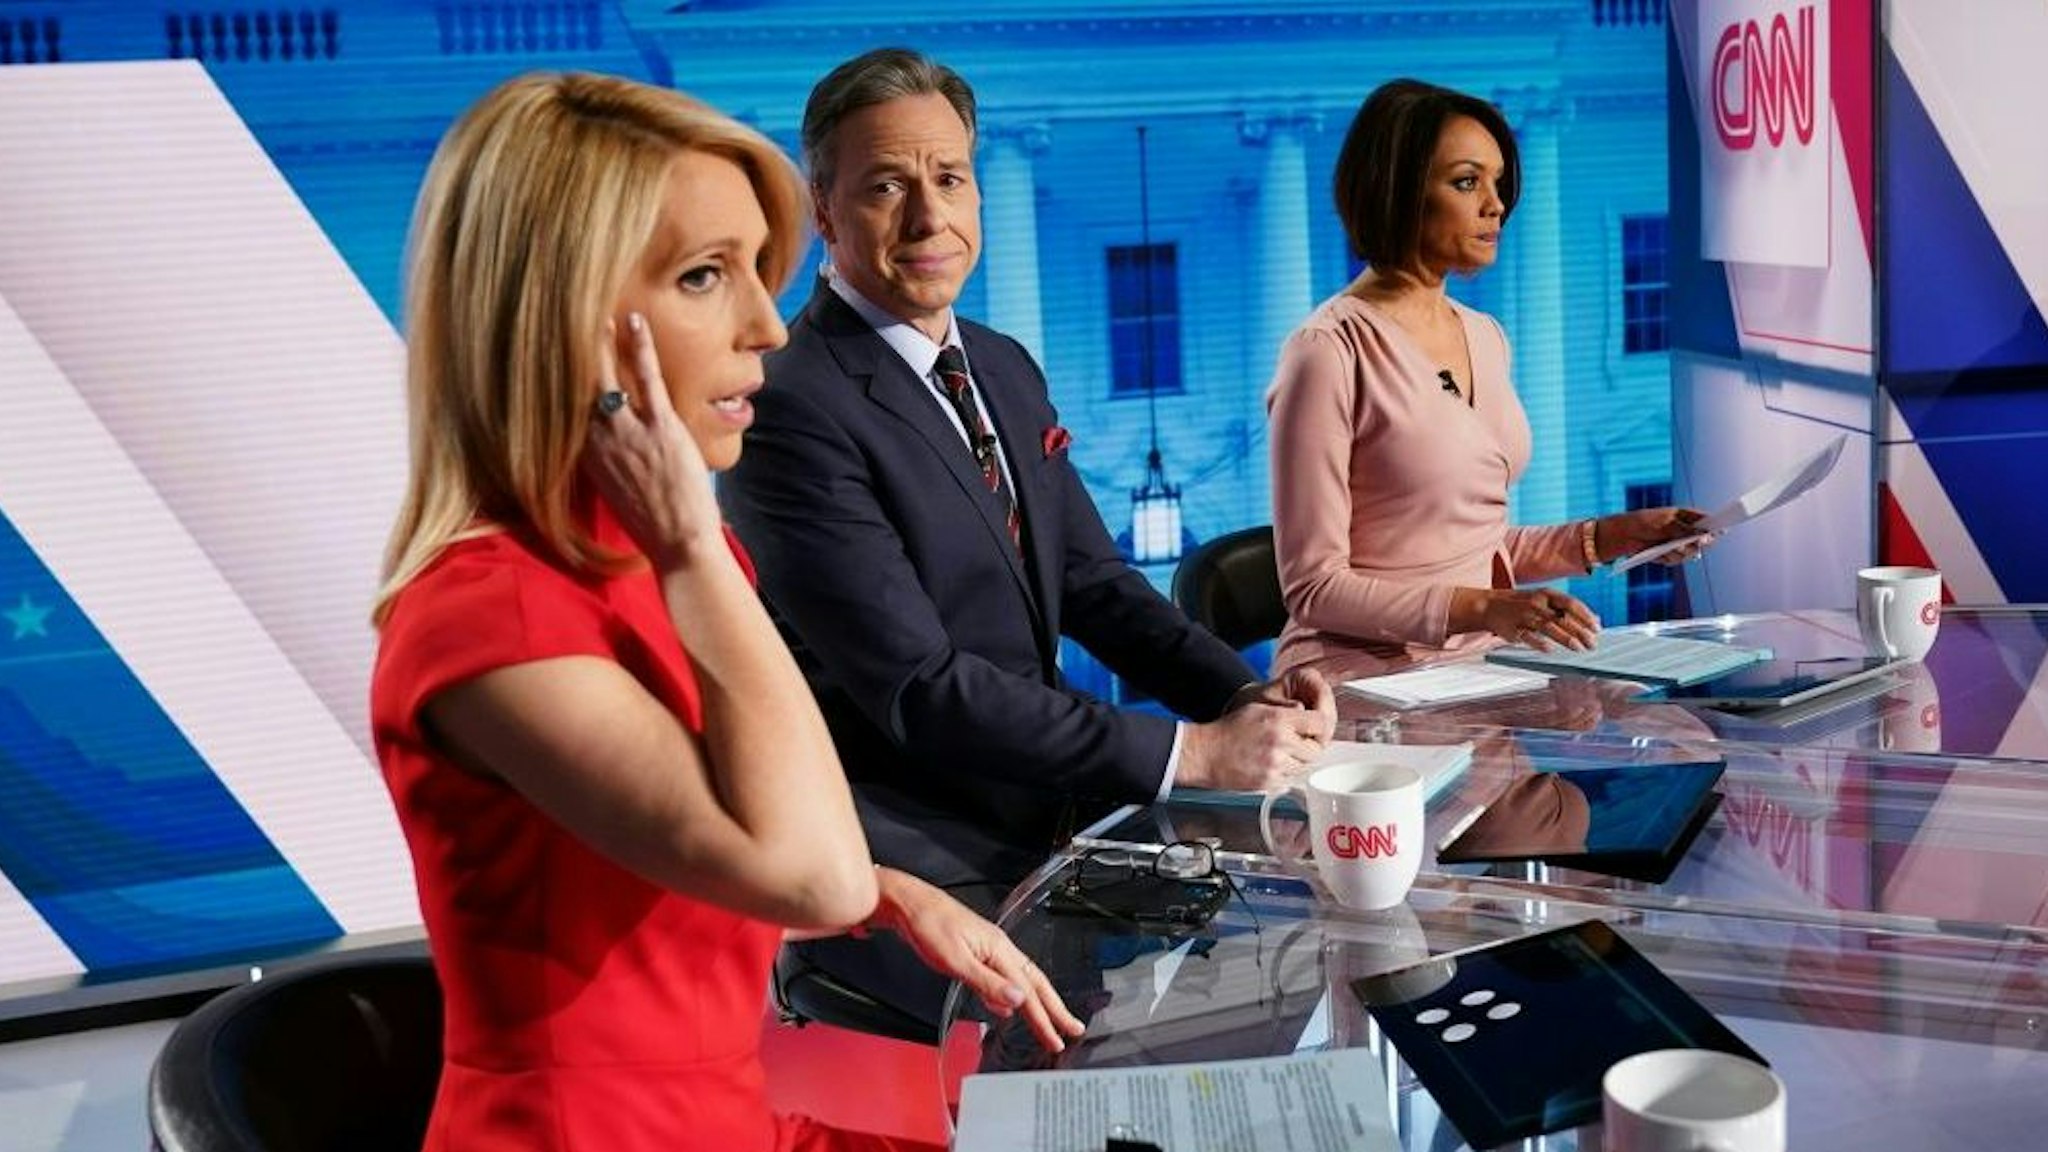 CNN news anchor Jake Tapper (C), flanked by Univision's news anchor Ilia Calderón (R), watches as co-anchor Dana Bash adjusts her ear piece before the start of the 11th Democratic Party 2020 presidential debate with former Vice-President Joe Biden and Vermont Senator Bernie Sanders in a CNN Washington Bureau studio in Washington, DC on March 15, 2020.